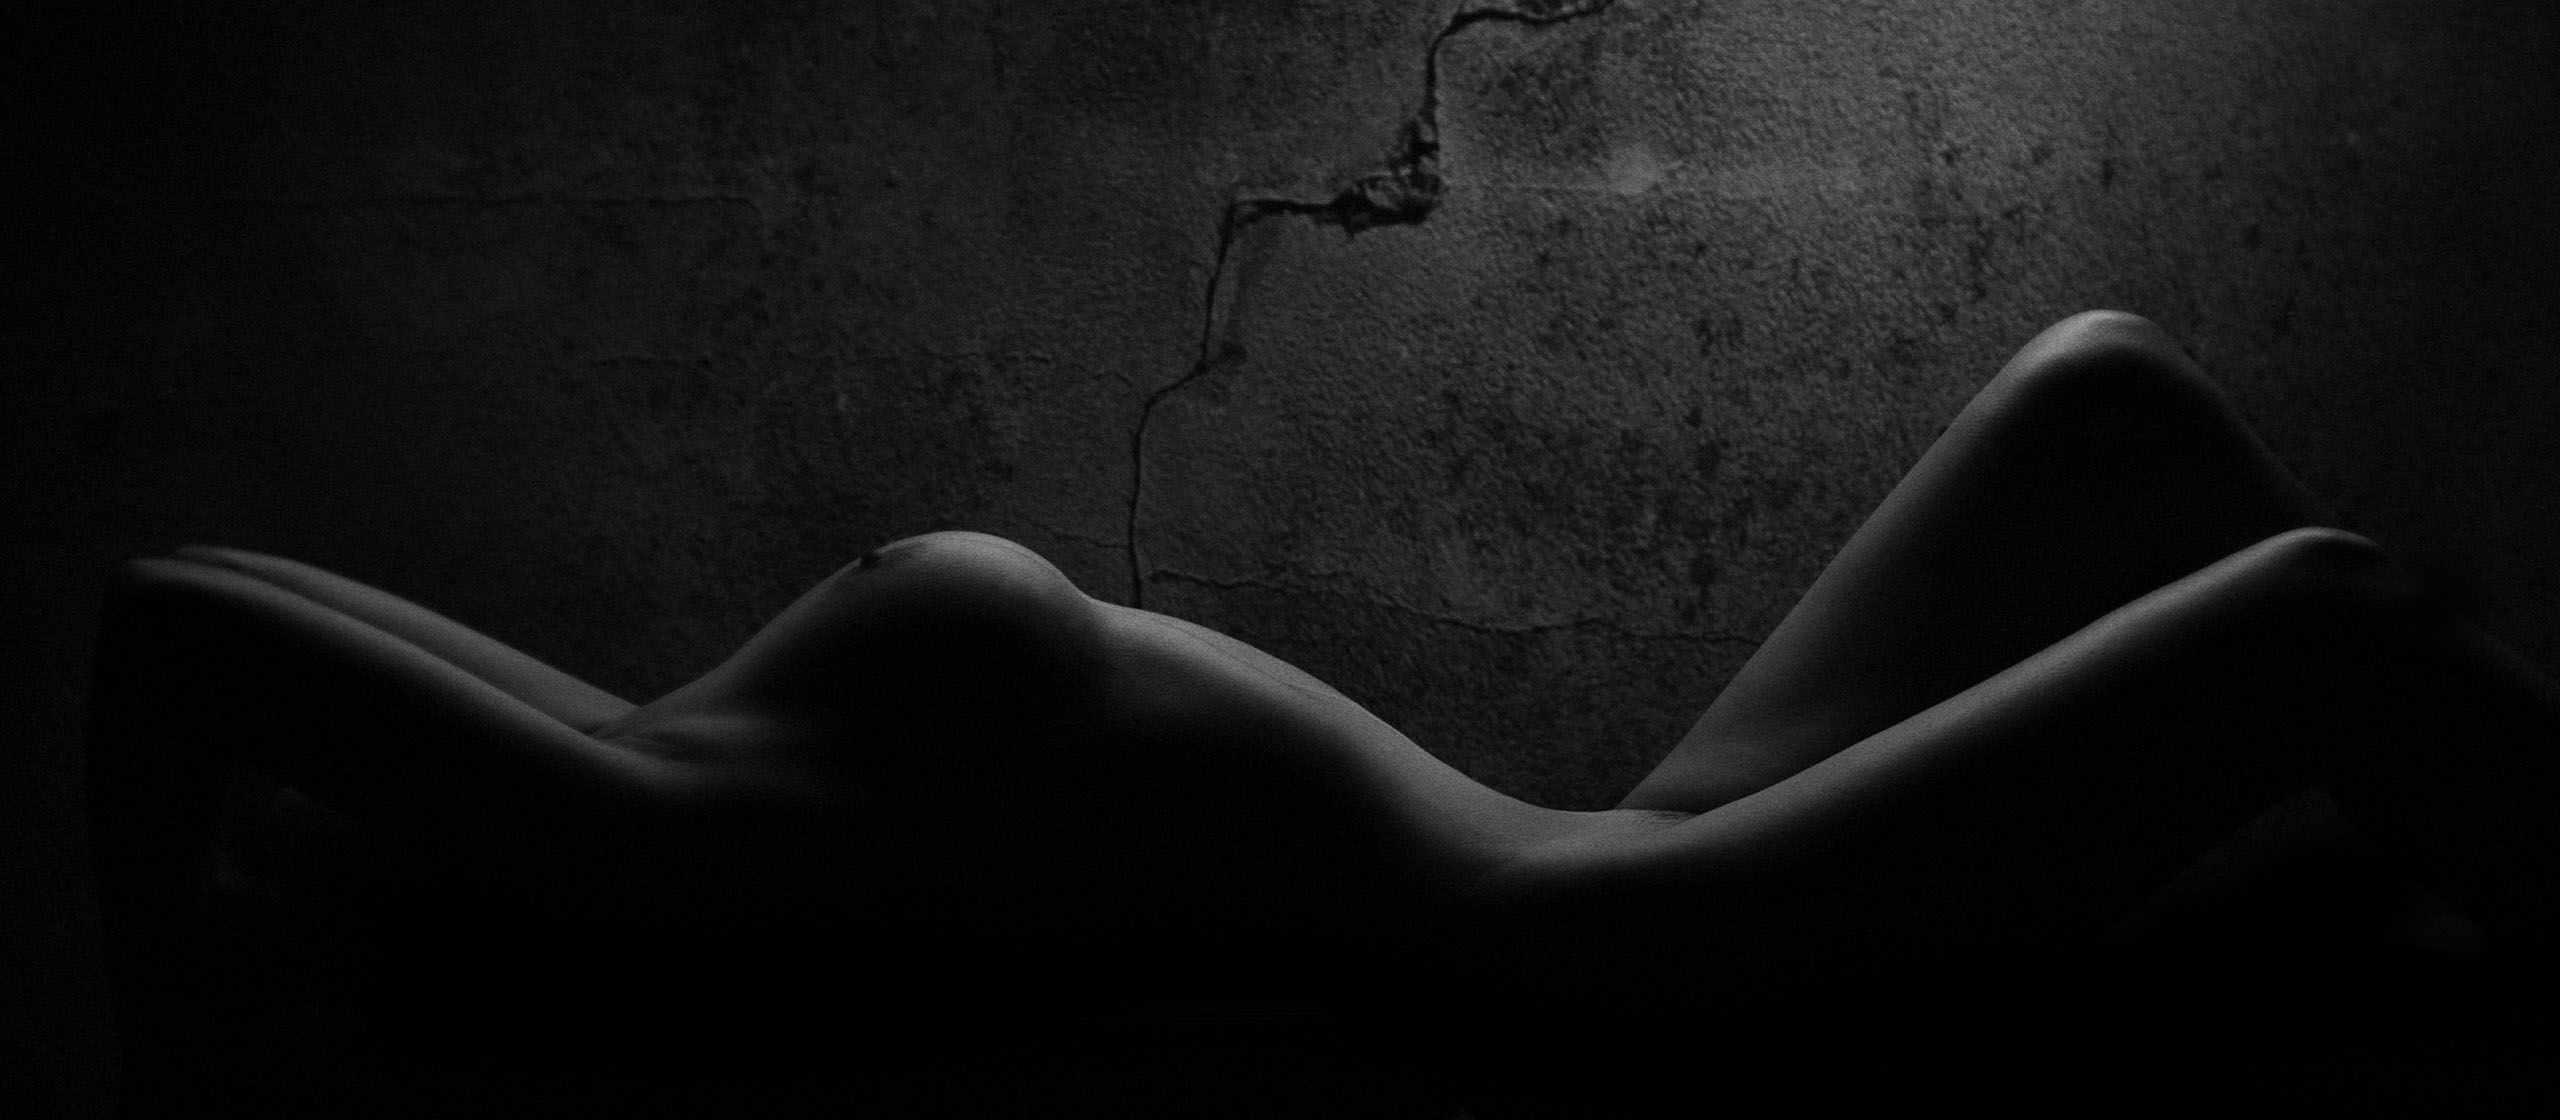 Nude woman in dark lite room, breasts highlighted by the light